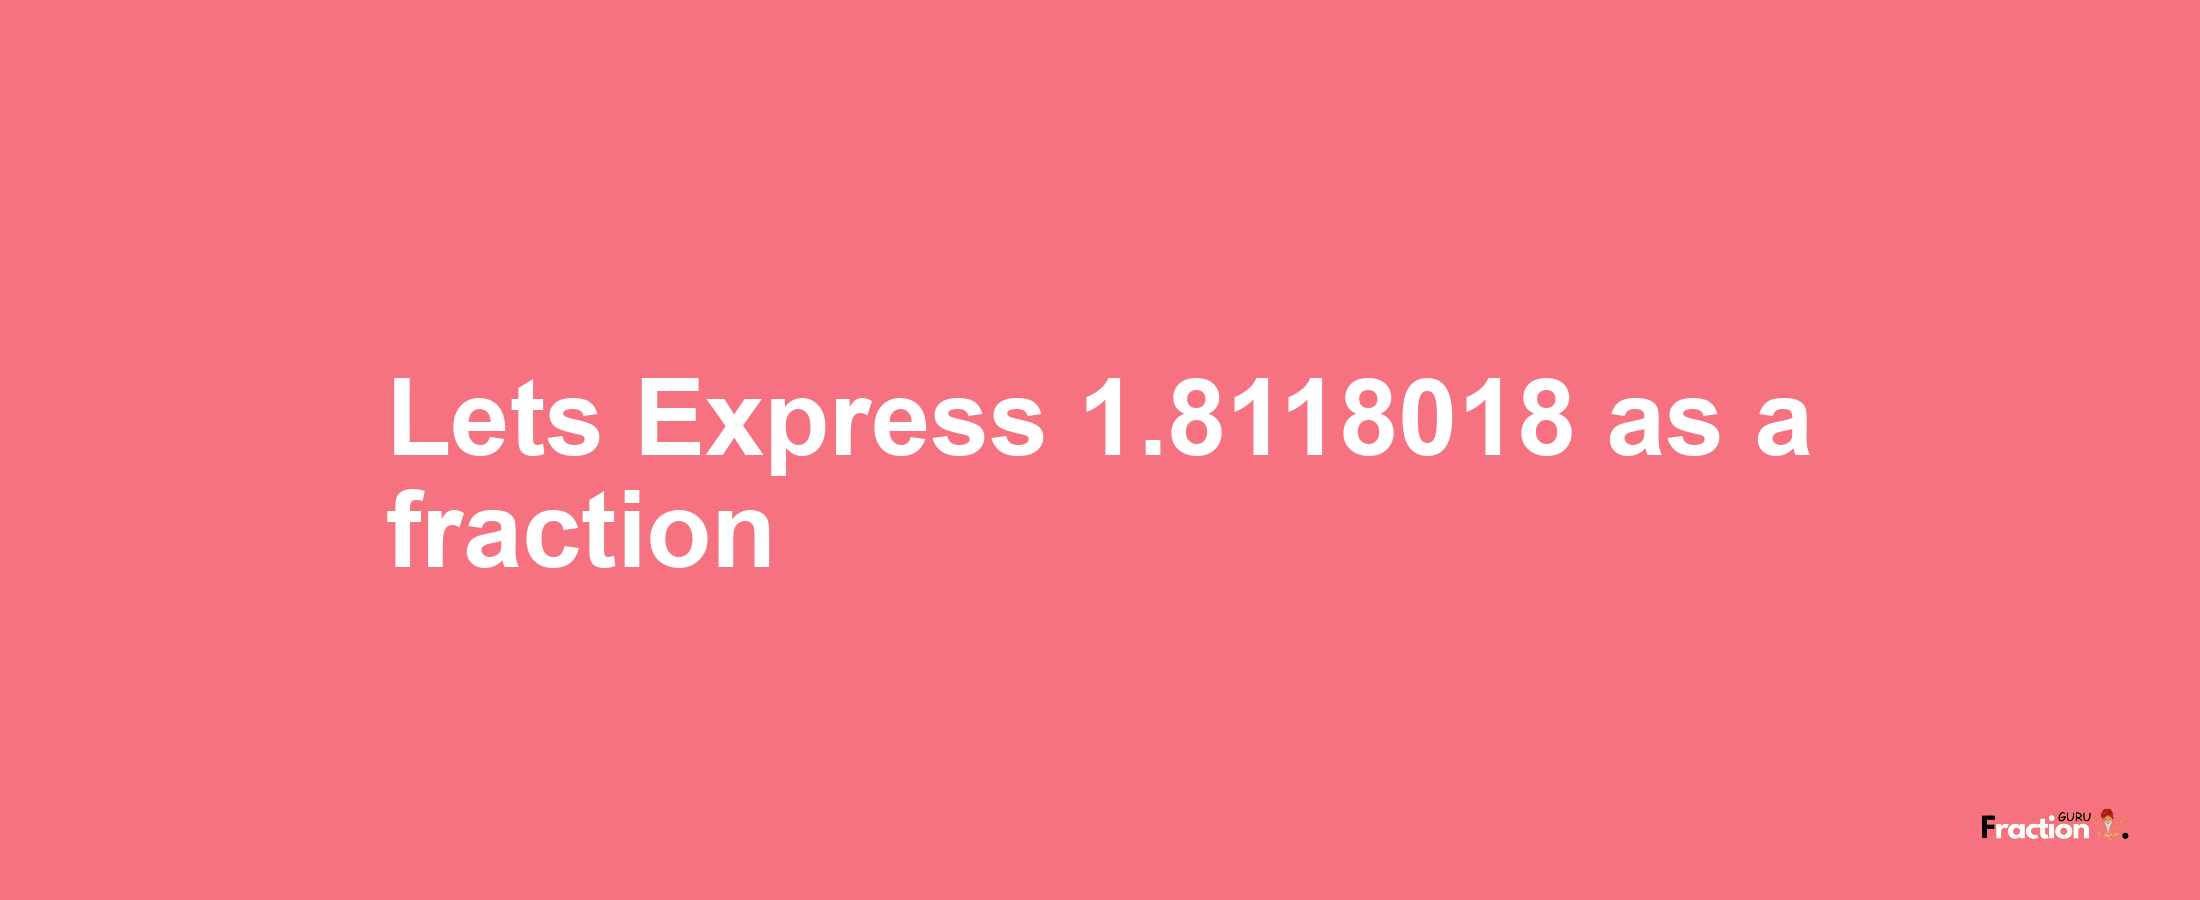 Lets Express 1.8118018 as afraction